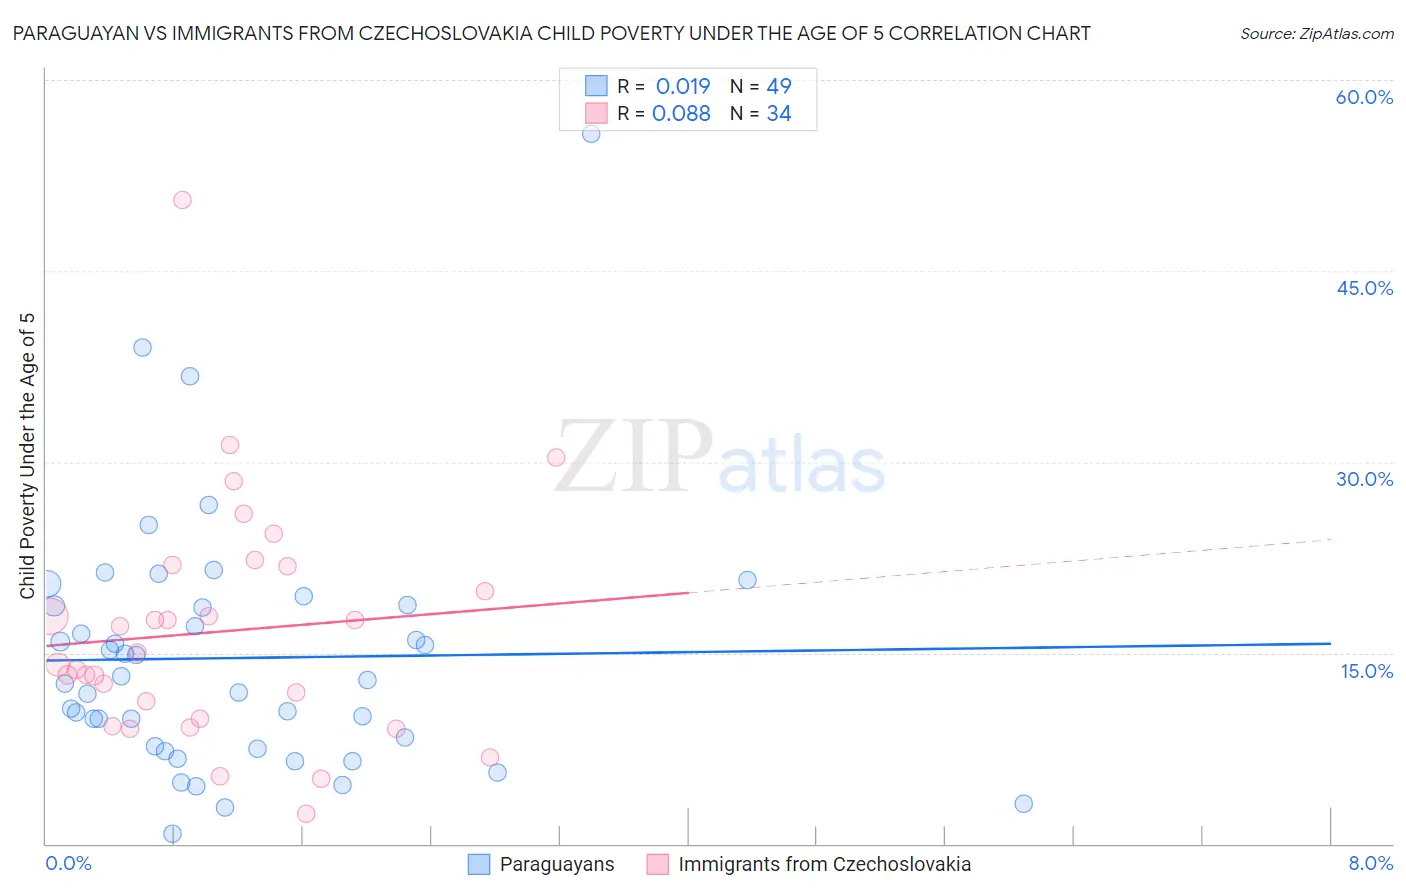 Paraguayan vs Immigrants from Czechoslovakia Child Poverty Under the Age of 5